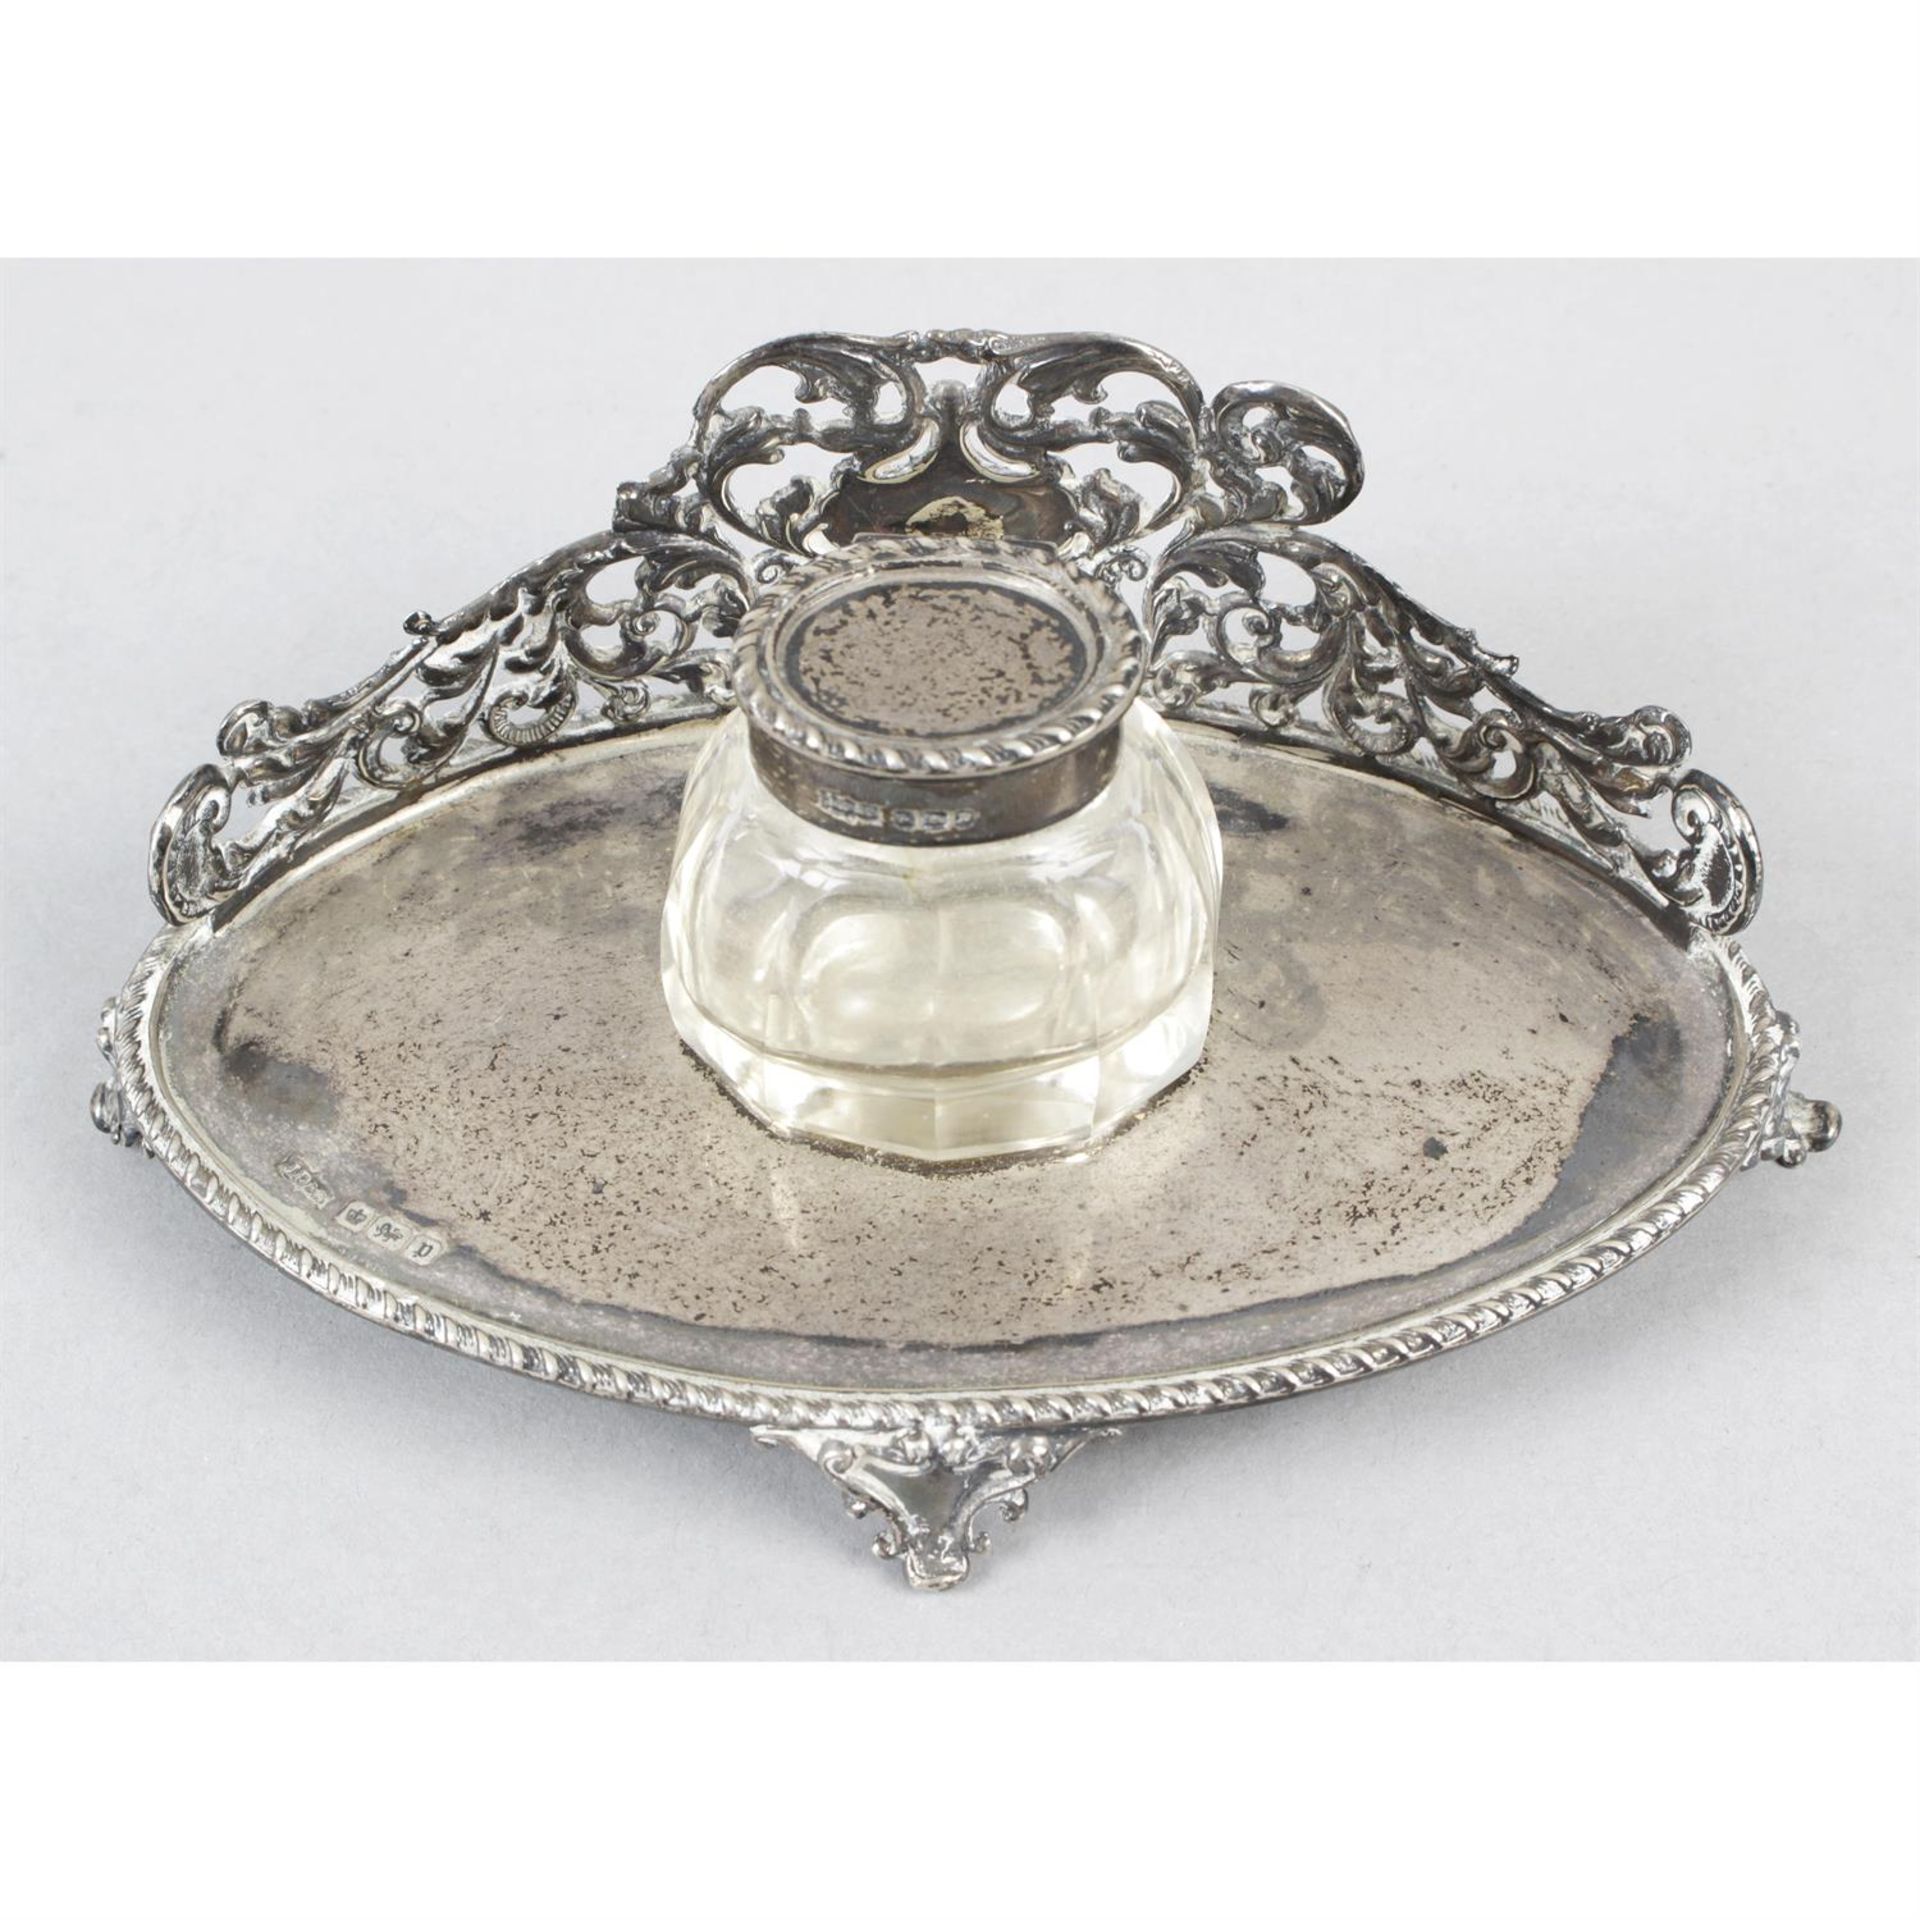 A small Edwardian silver inkstand with removable silver mounted glass inkwell.